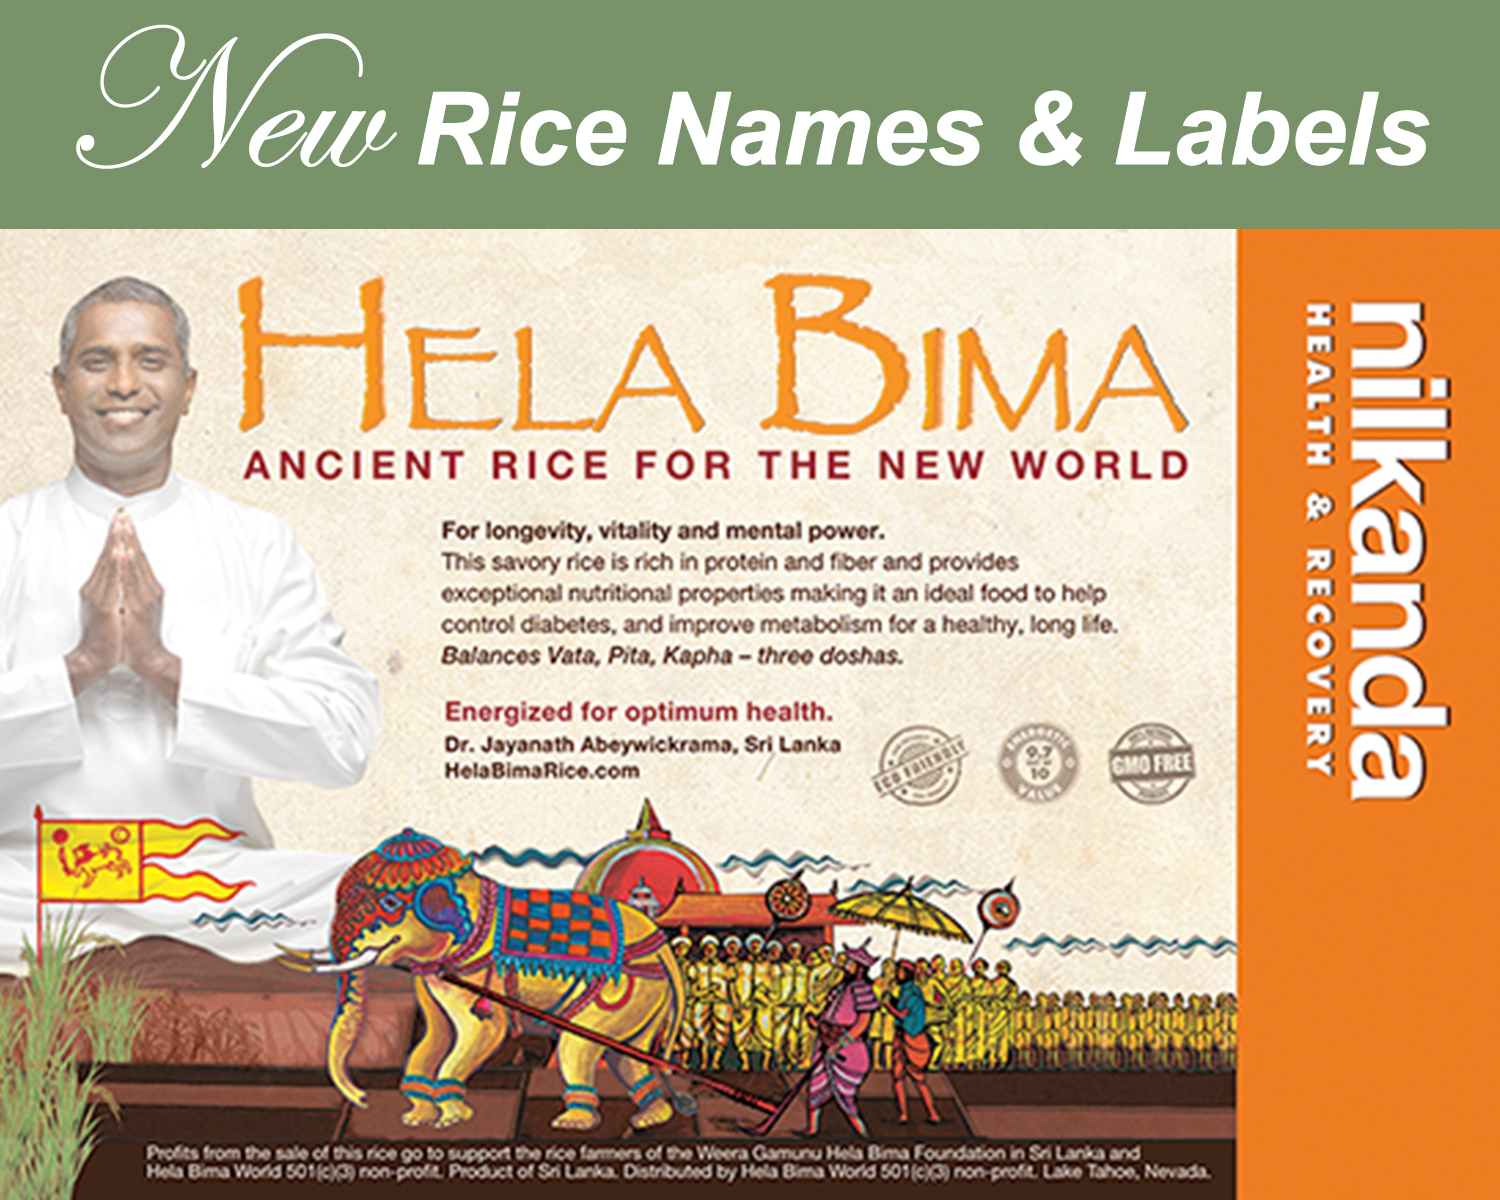 New Rice Names and Labels